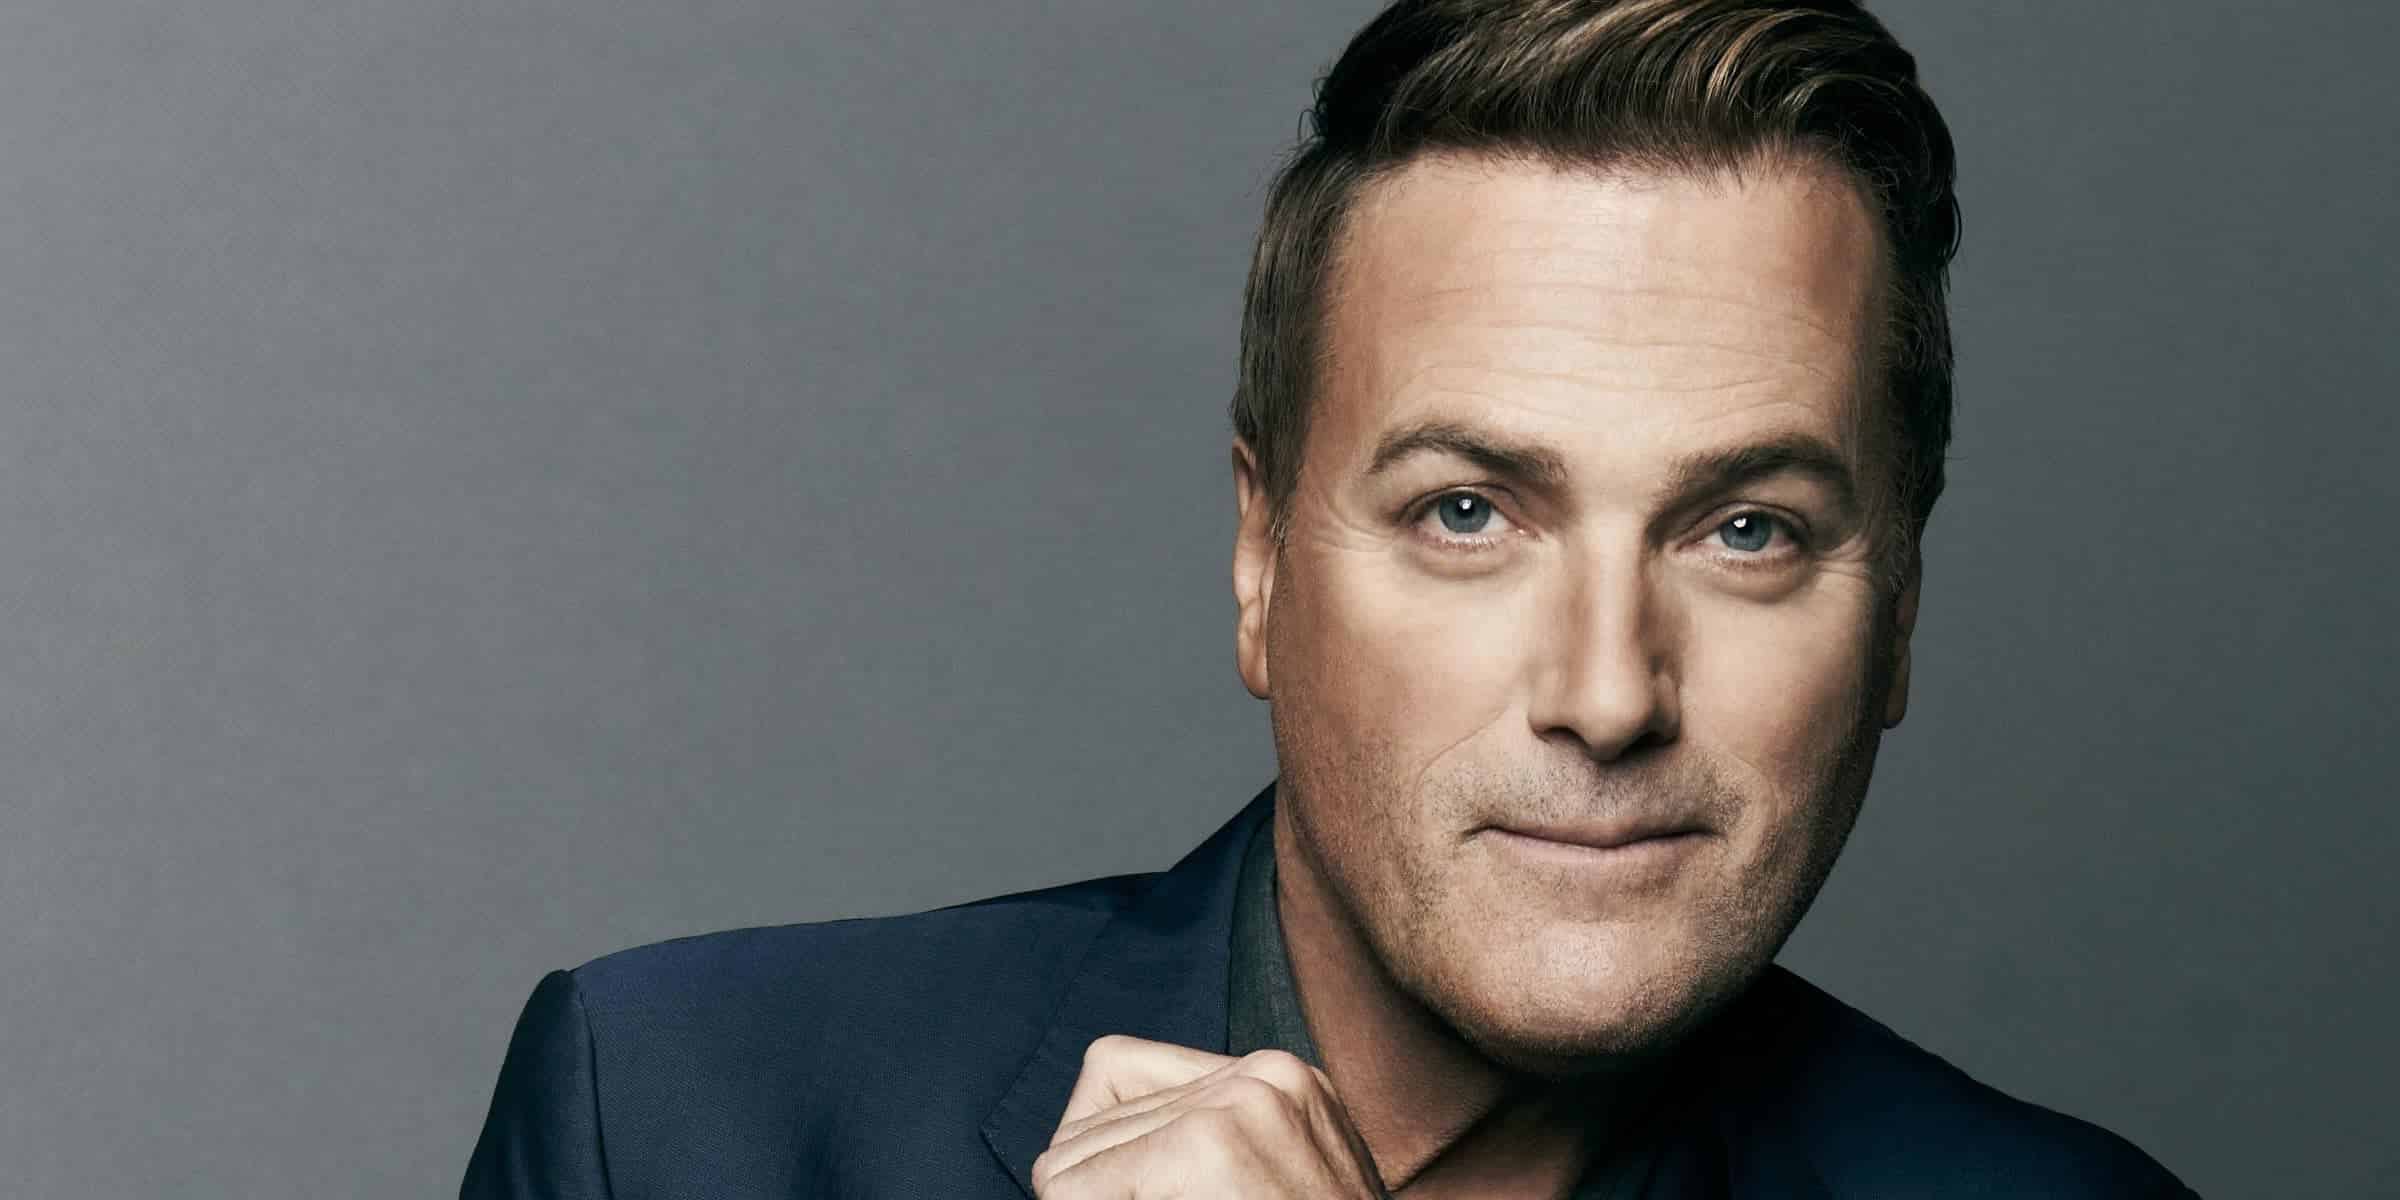 10 Best Michael W Smith Songs of All Time - Singersroom.com